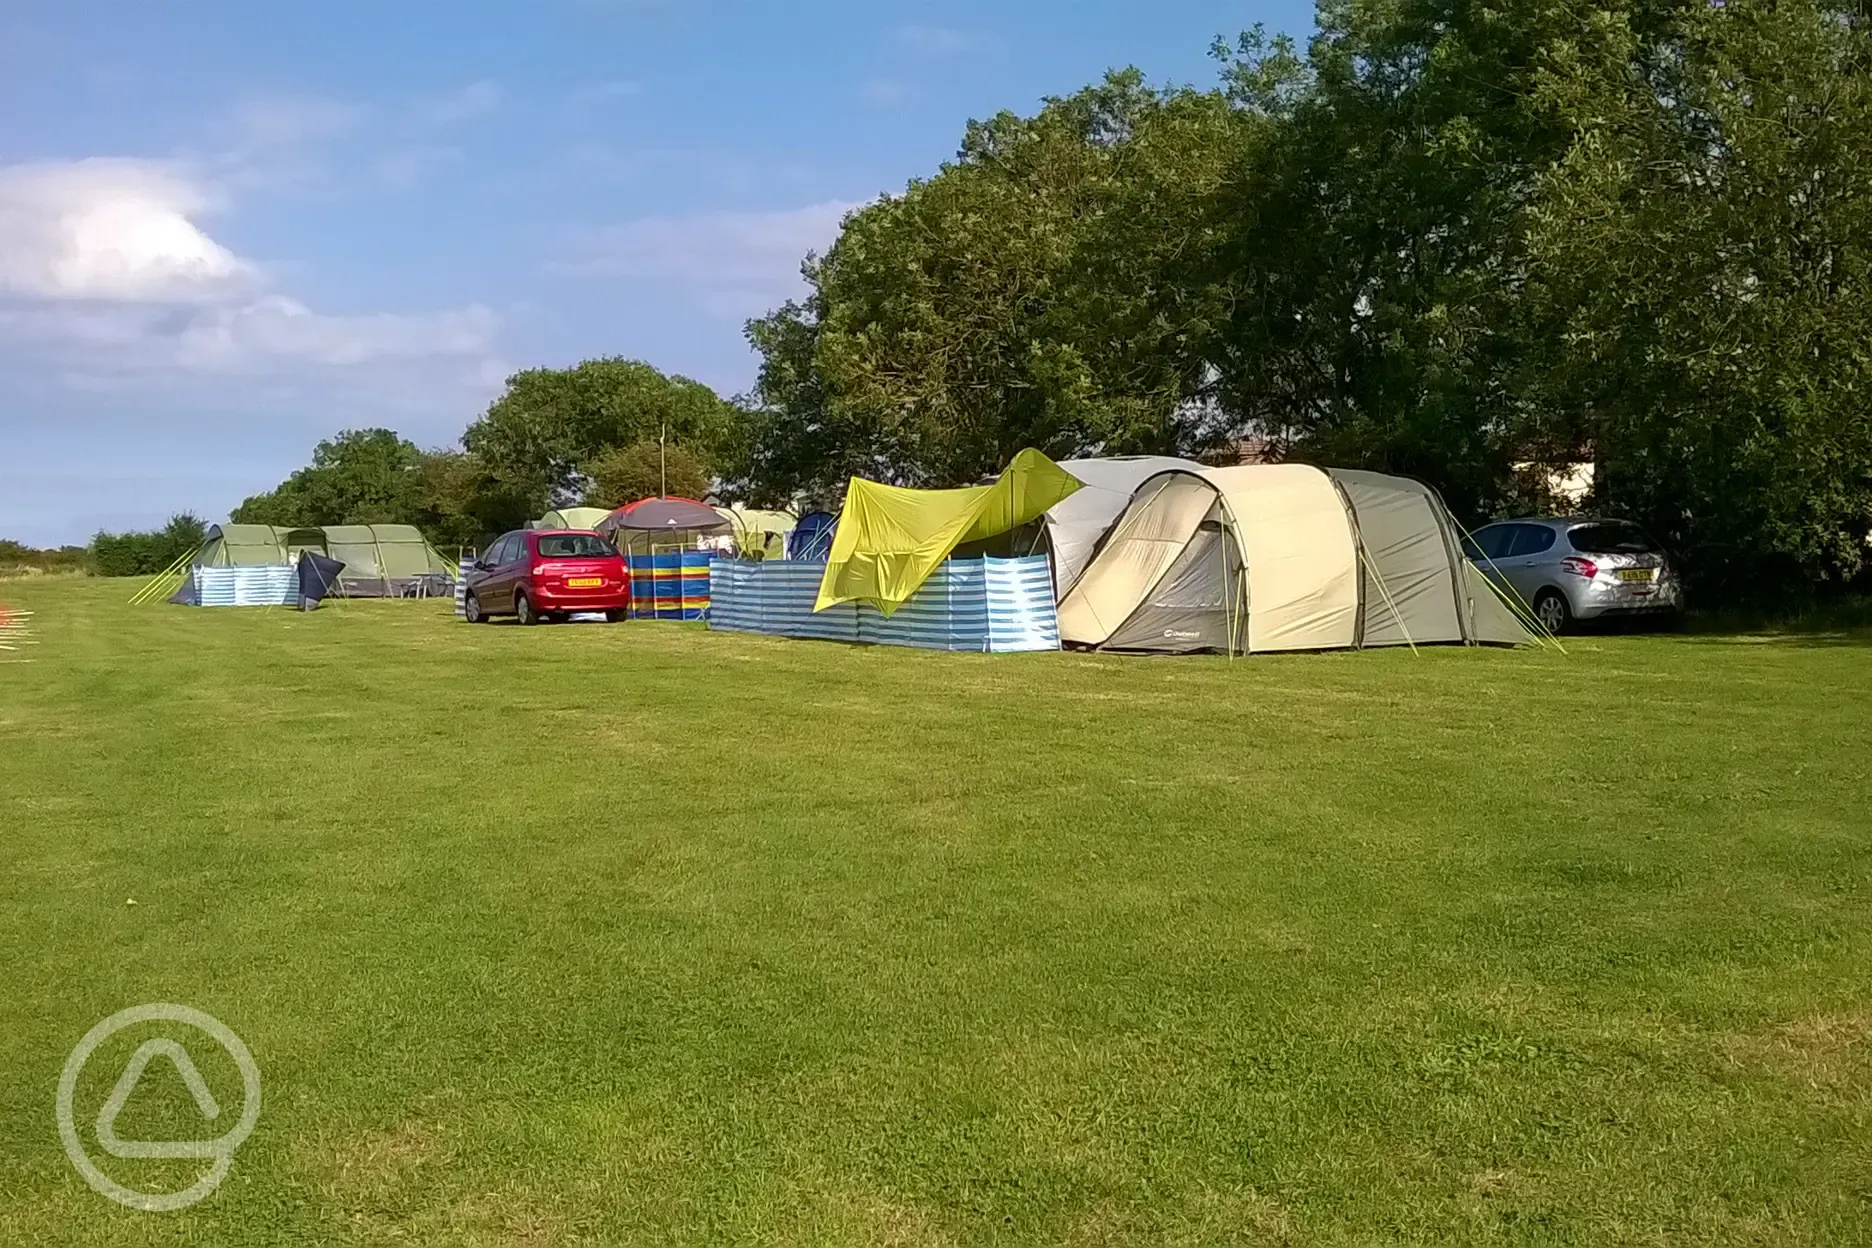 Enjoy the Outdoor Life of Tenting